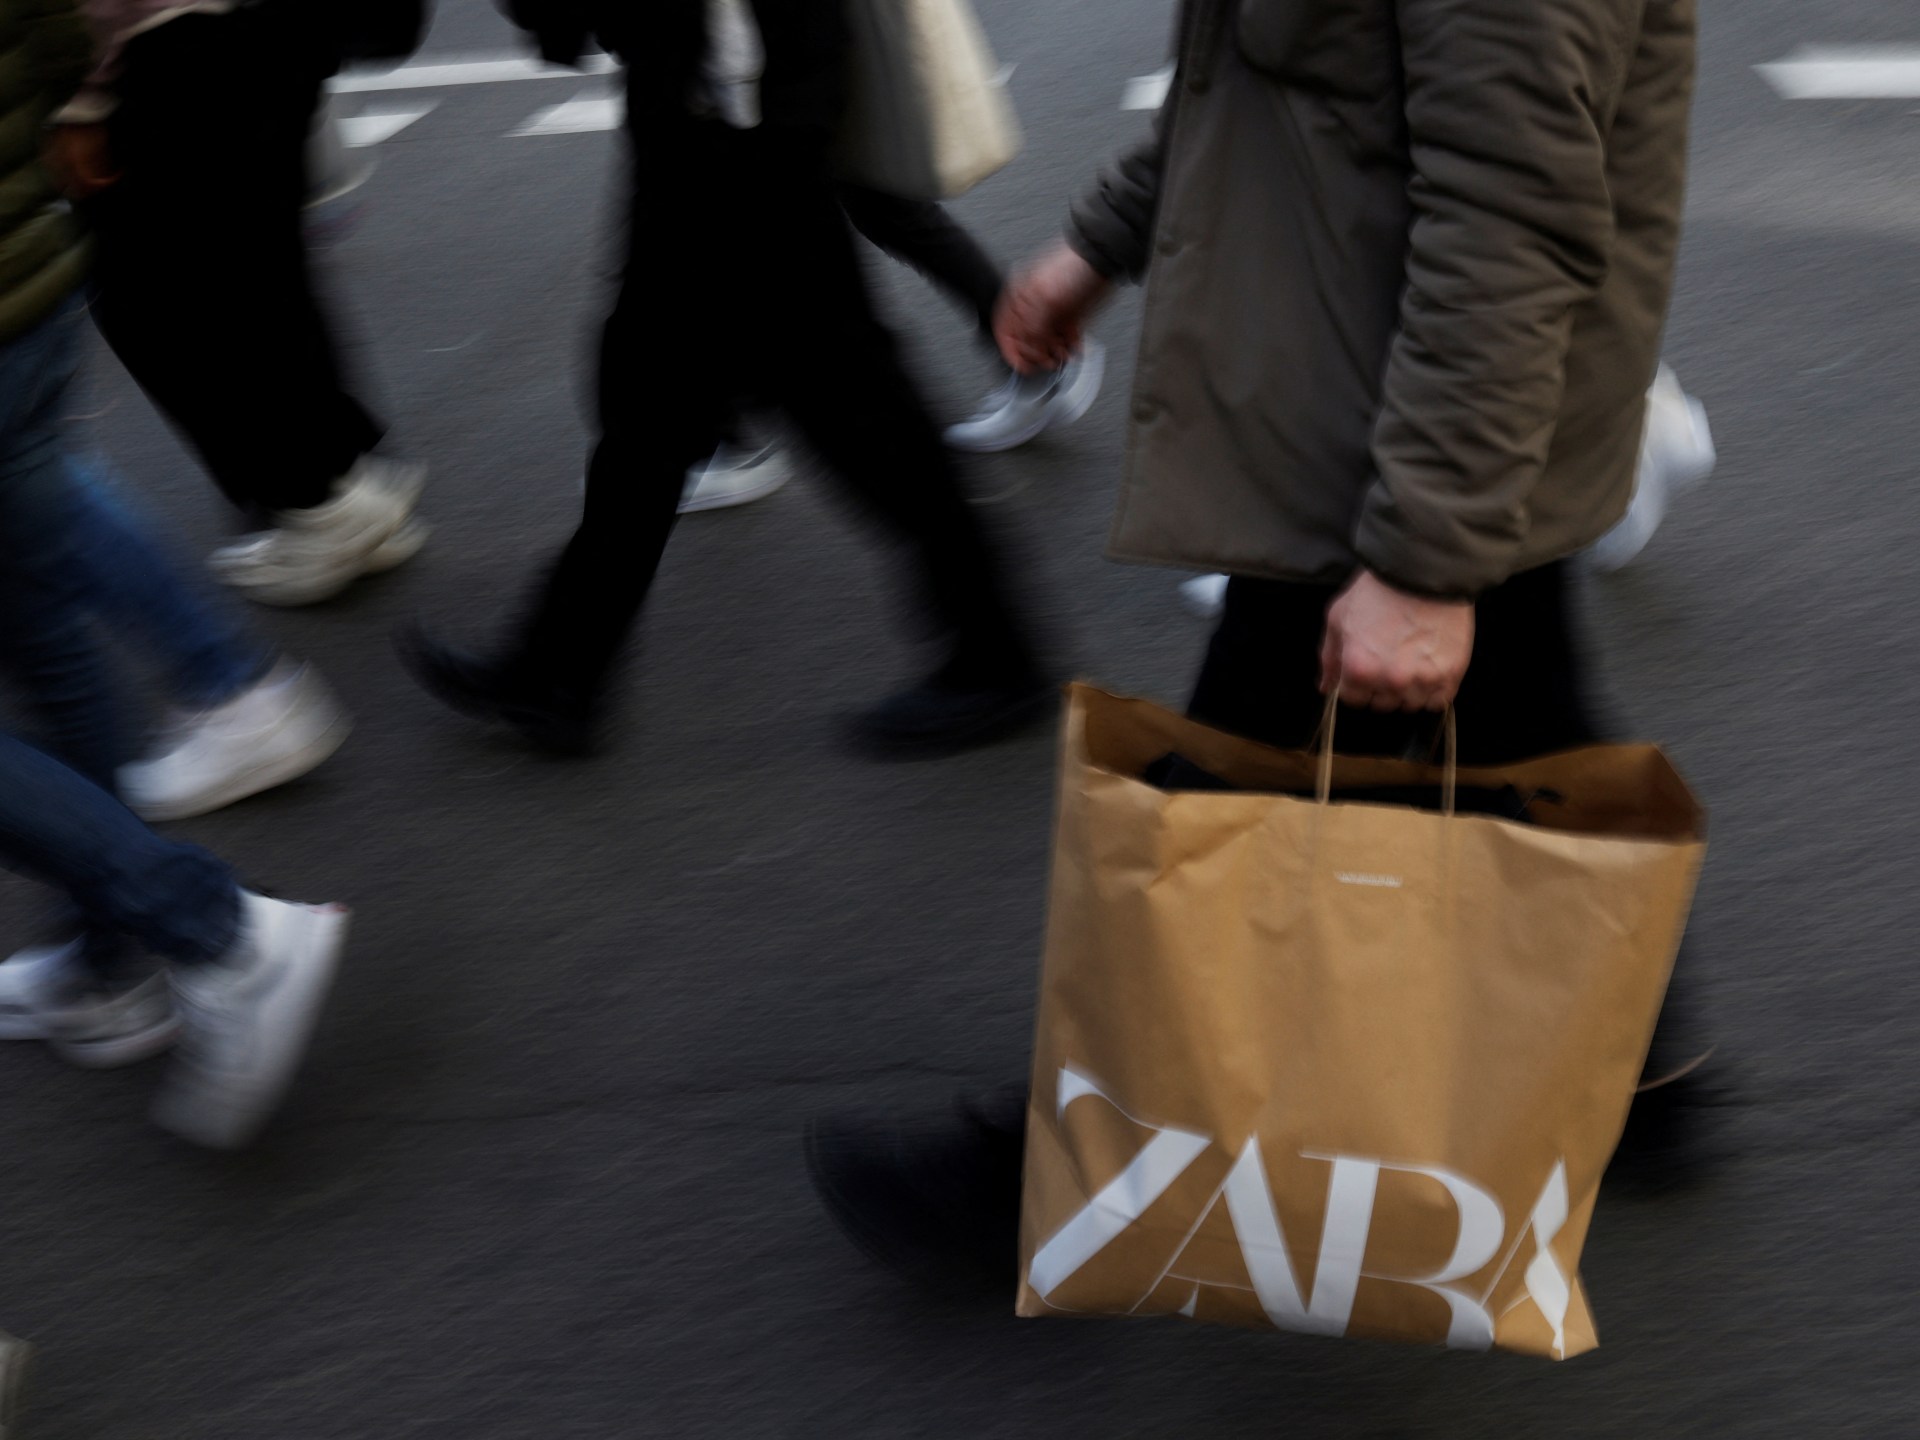 Zara pulls controversial ad from website after Gaza boycott calls | Israel-Palestine conflict News #Zara #pulls #controversial #website #Gaza #boycott #calls #IsraelPalestine #conflict #News